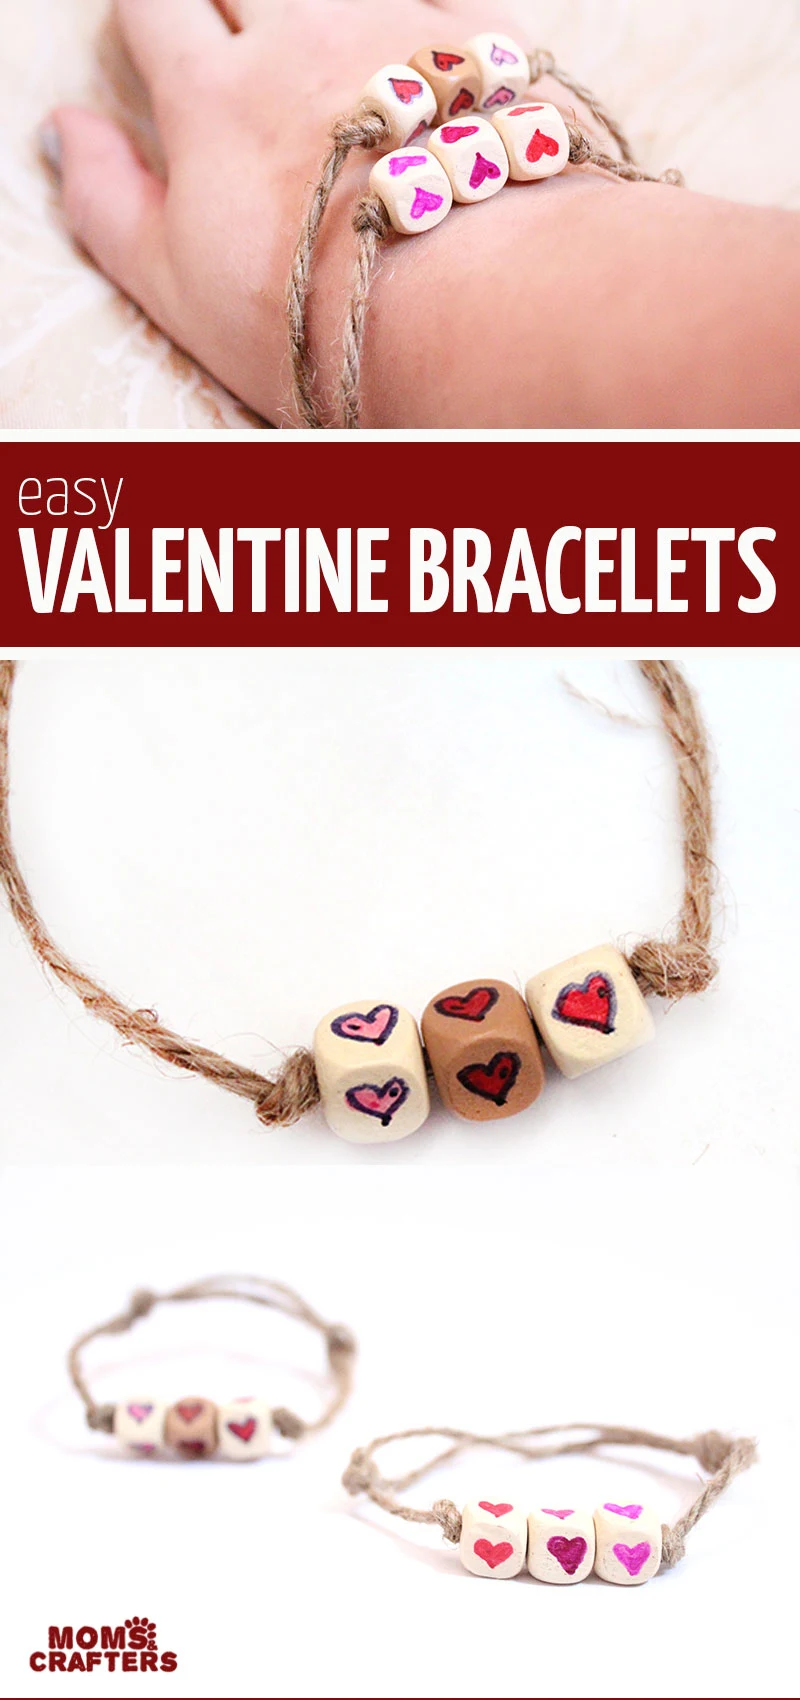 Click to learh now to make easy heart friendship bracelets - these fun DIY valentine ideas for tweens and teens are easy and cheap to make! 